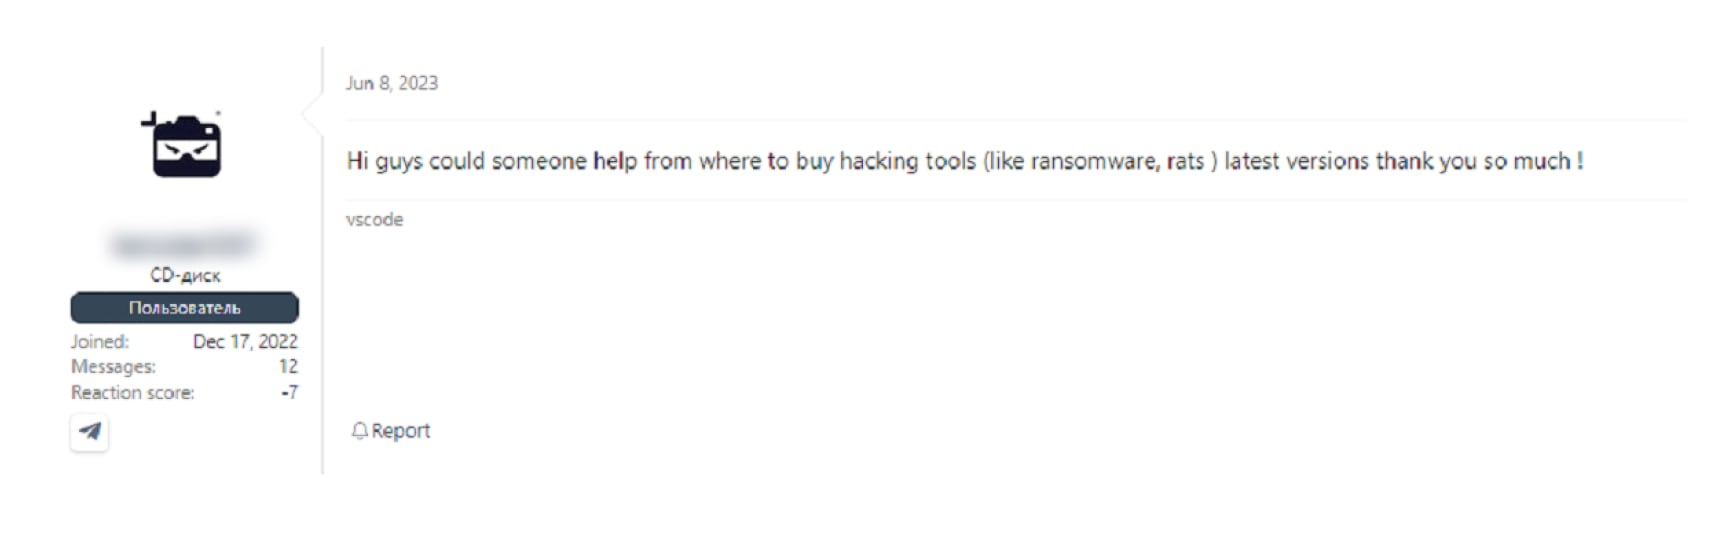 A post published on the XSS forum by a user who’s looking to buy illegal hacking tools